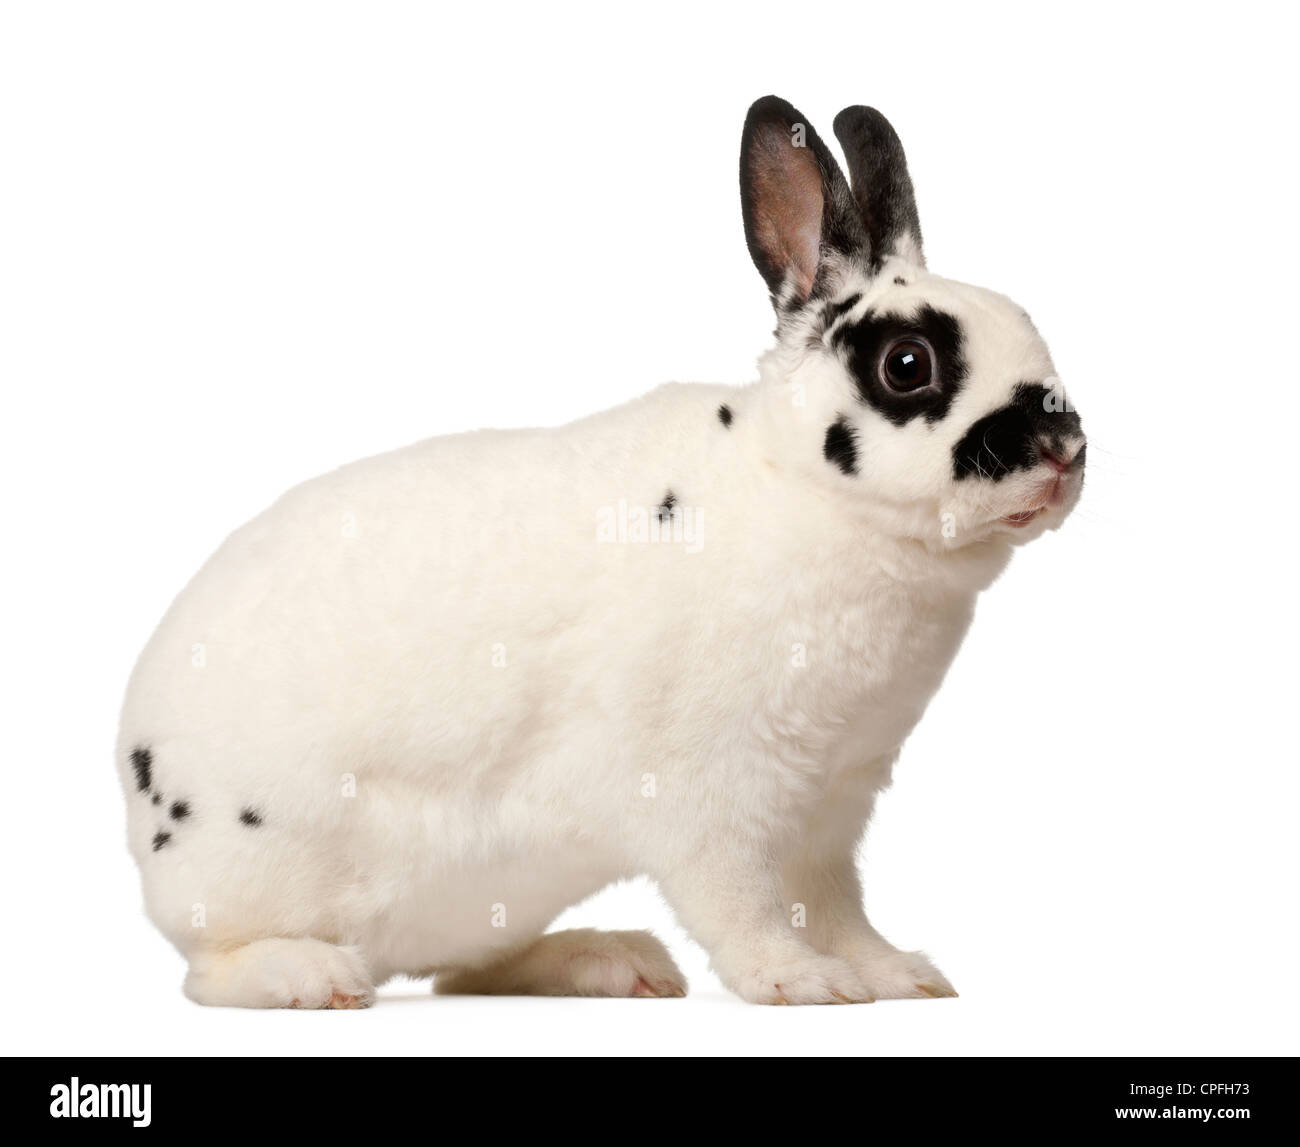 Dalmatian rabbit, Oryctolagus cuniculus, 4 months old, against white background Stock Photo